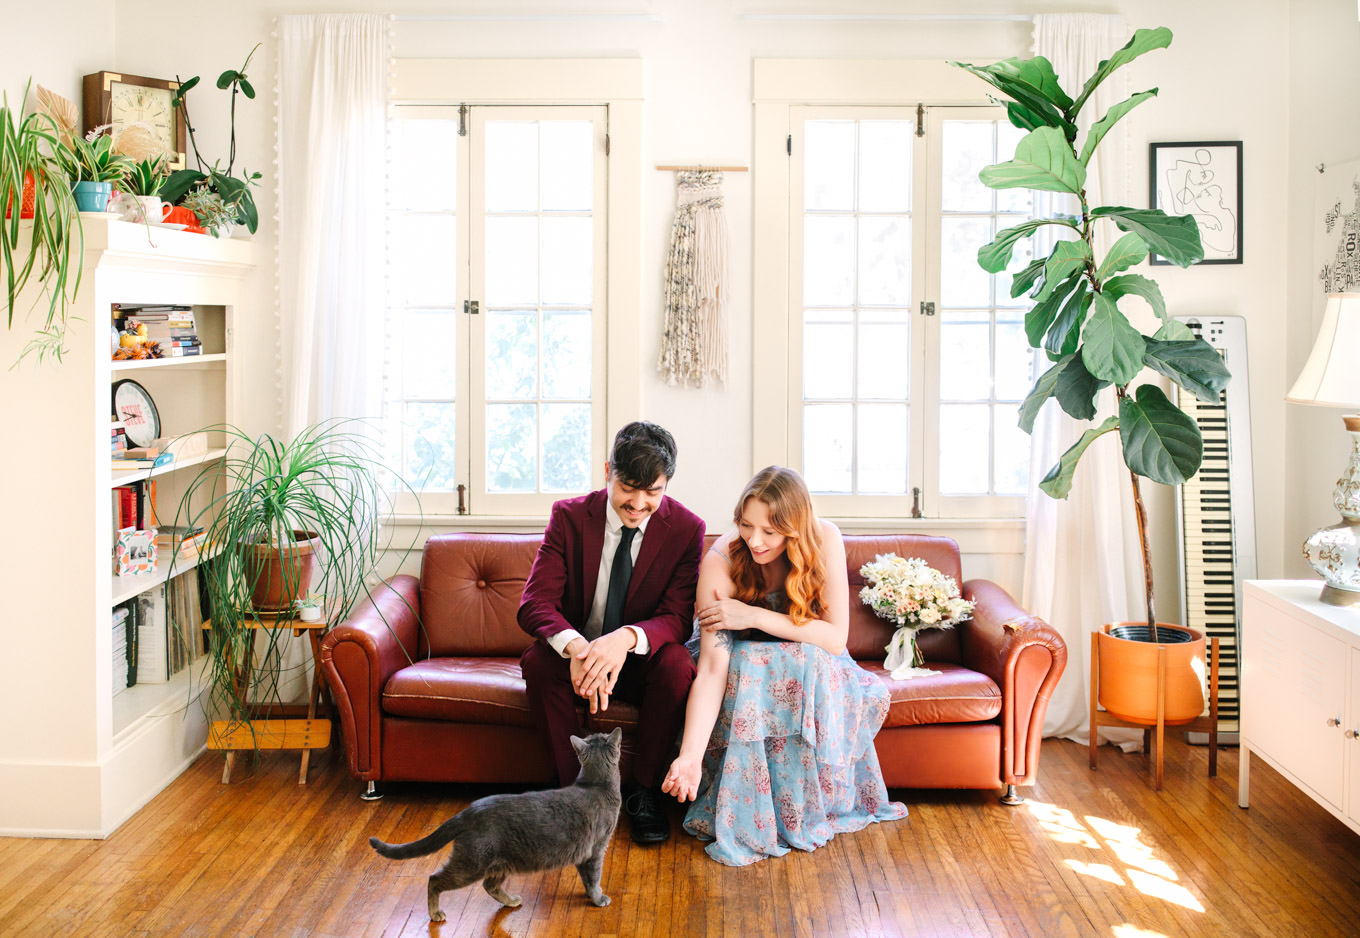 At home elopement with cat in Echo Park | Engagement, elopement, and wedding photography roundup of Mary Costa’s favorite images from 2020 | Colorful and elevated photography for fun-loving couples in Southern California | #2020wedding #elopement #weddingphoto #weddingphotography #microwedding   Source: Mary Costa Photography | Los Angeles